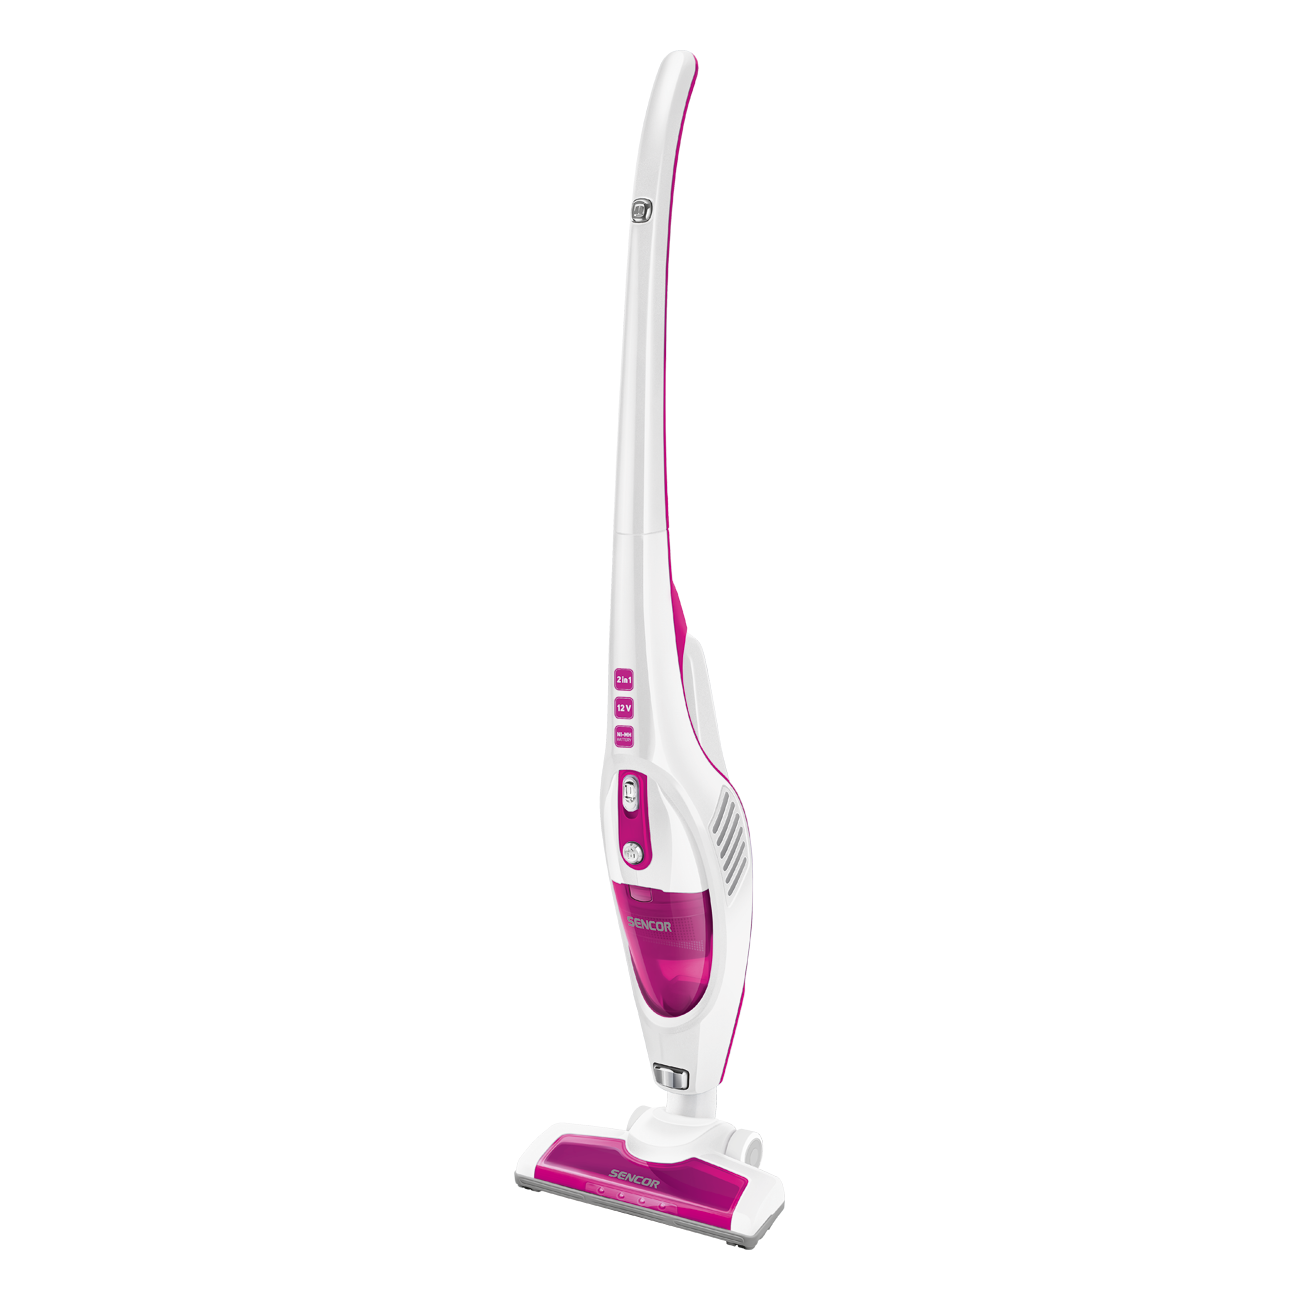 SVC 7612VT Multifunction Bagless Upright 2-in-1 Vacuum Cleaner